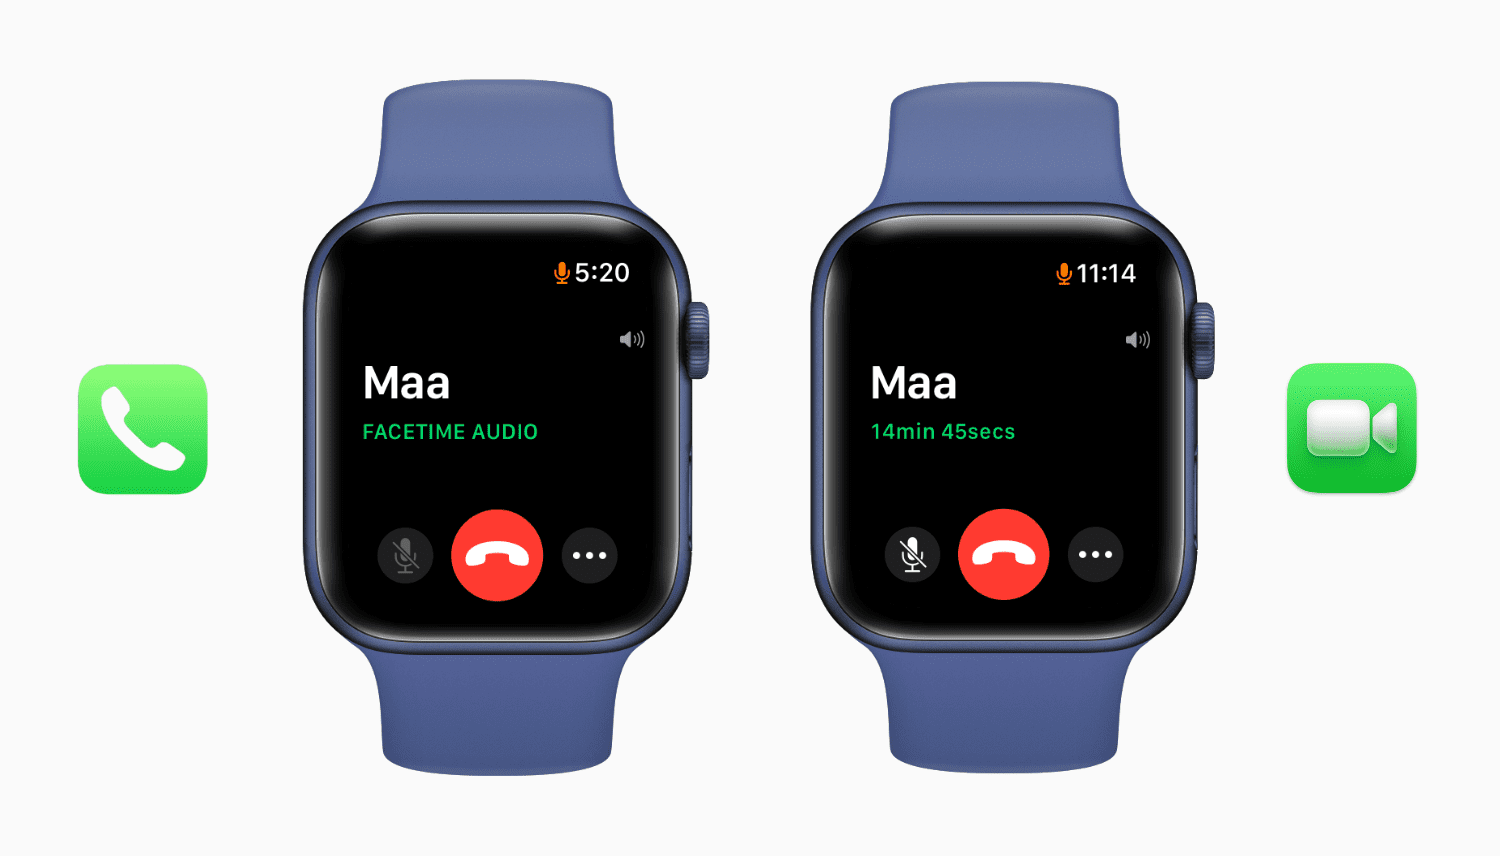 How to make FaceTime calls on Apple Watch